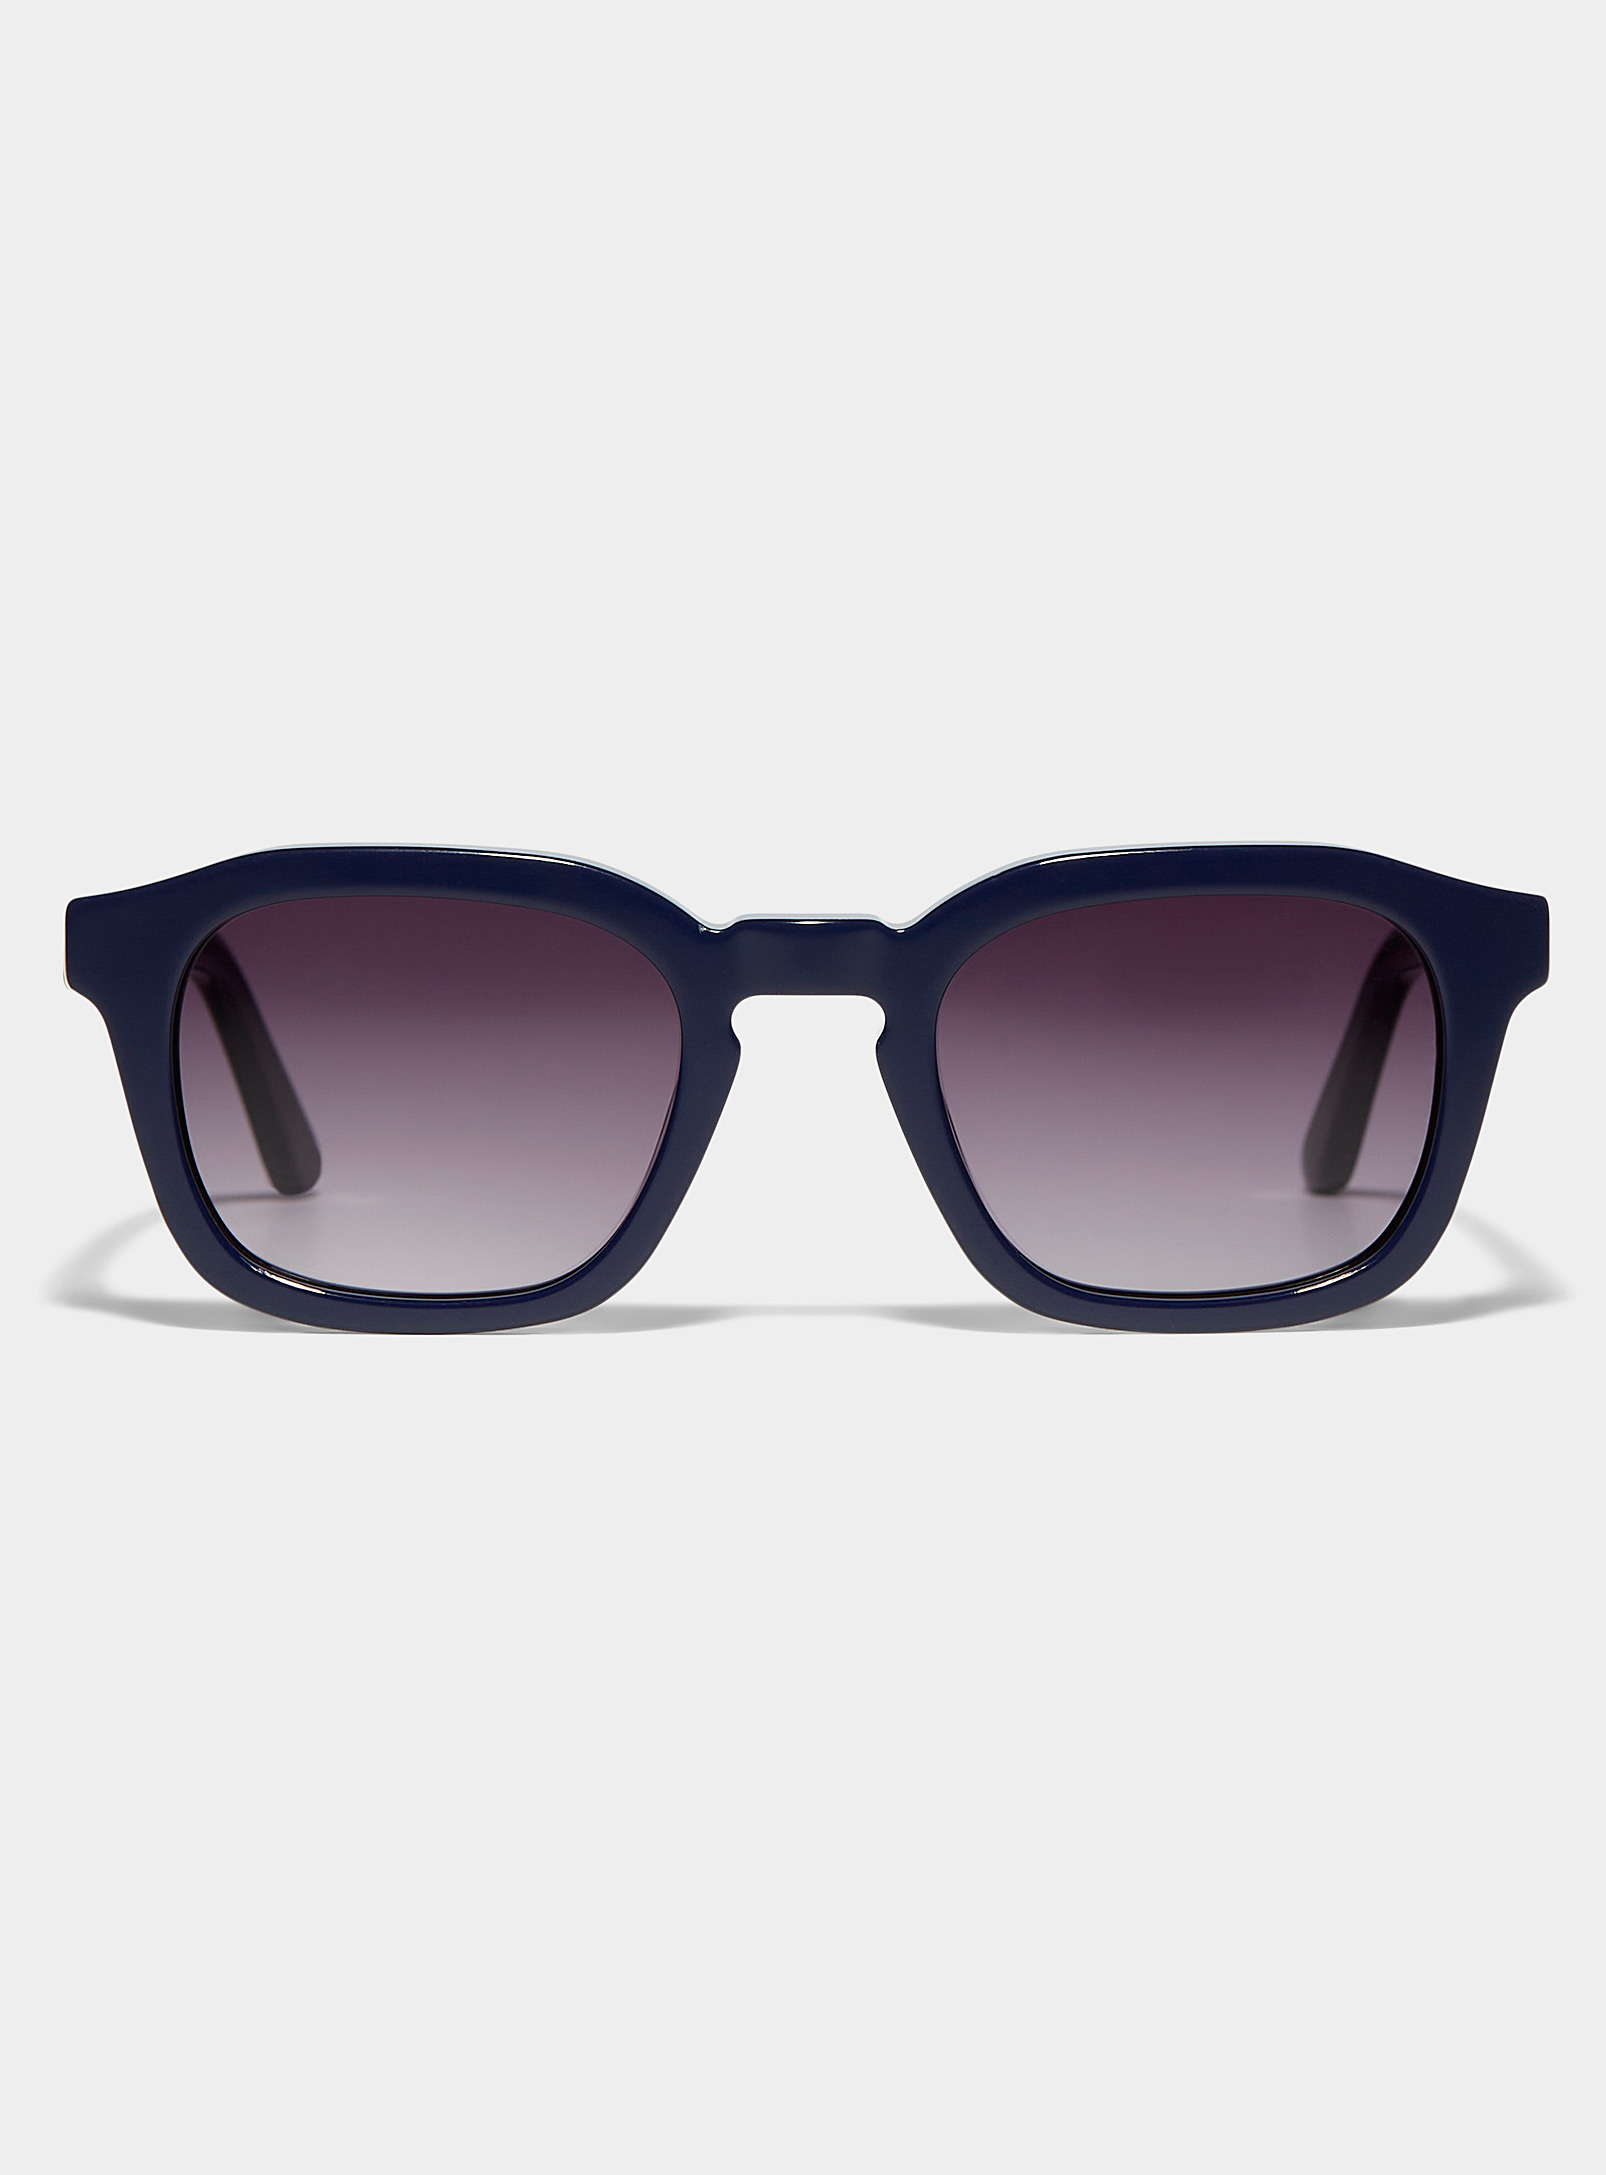 French Kiwis Oscar Square Sunglasses In Royal/sapphire Blue